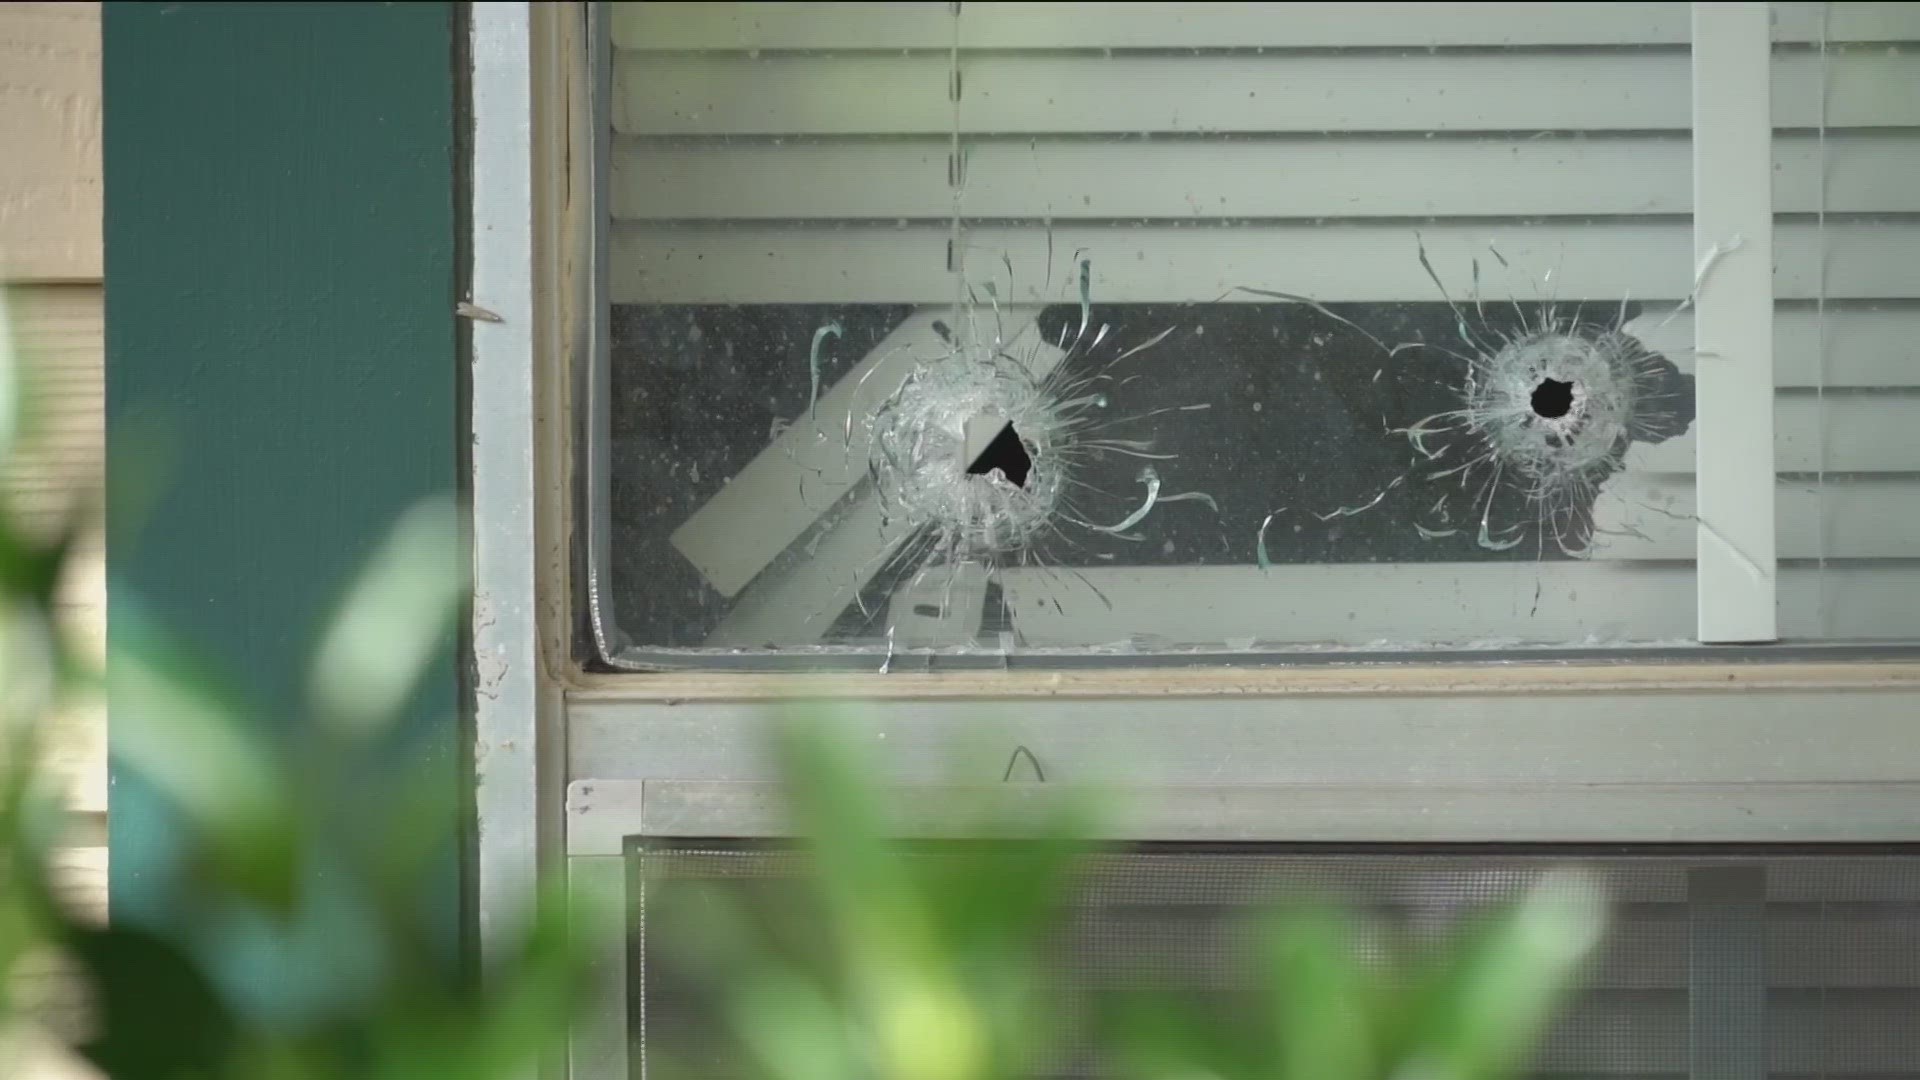 Neighbors in northeast Austin want to see increased police patrols after multiple shootings that hit homes along their street. Homes along Tuffit Lane have been hit.